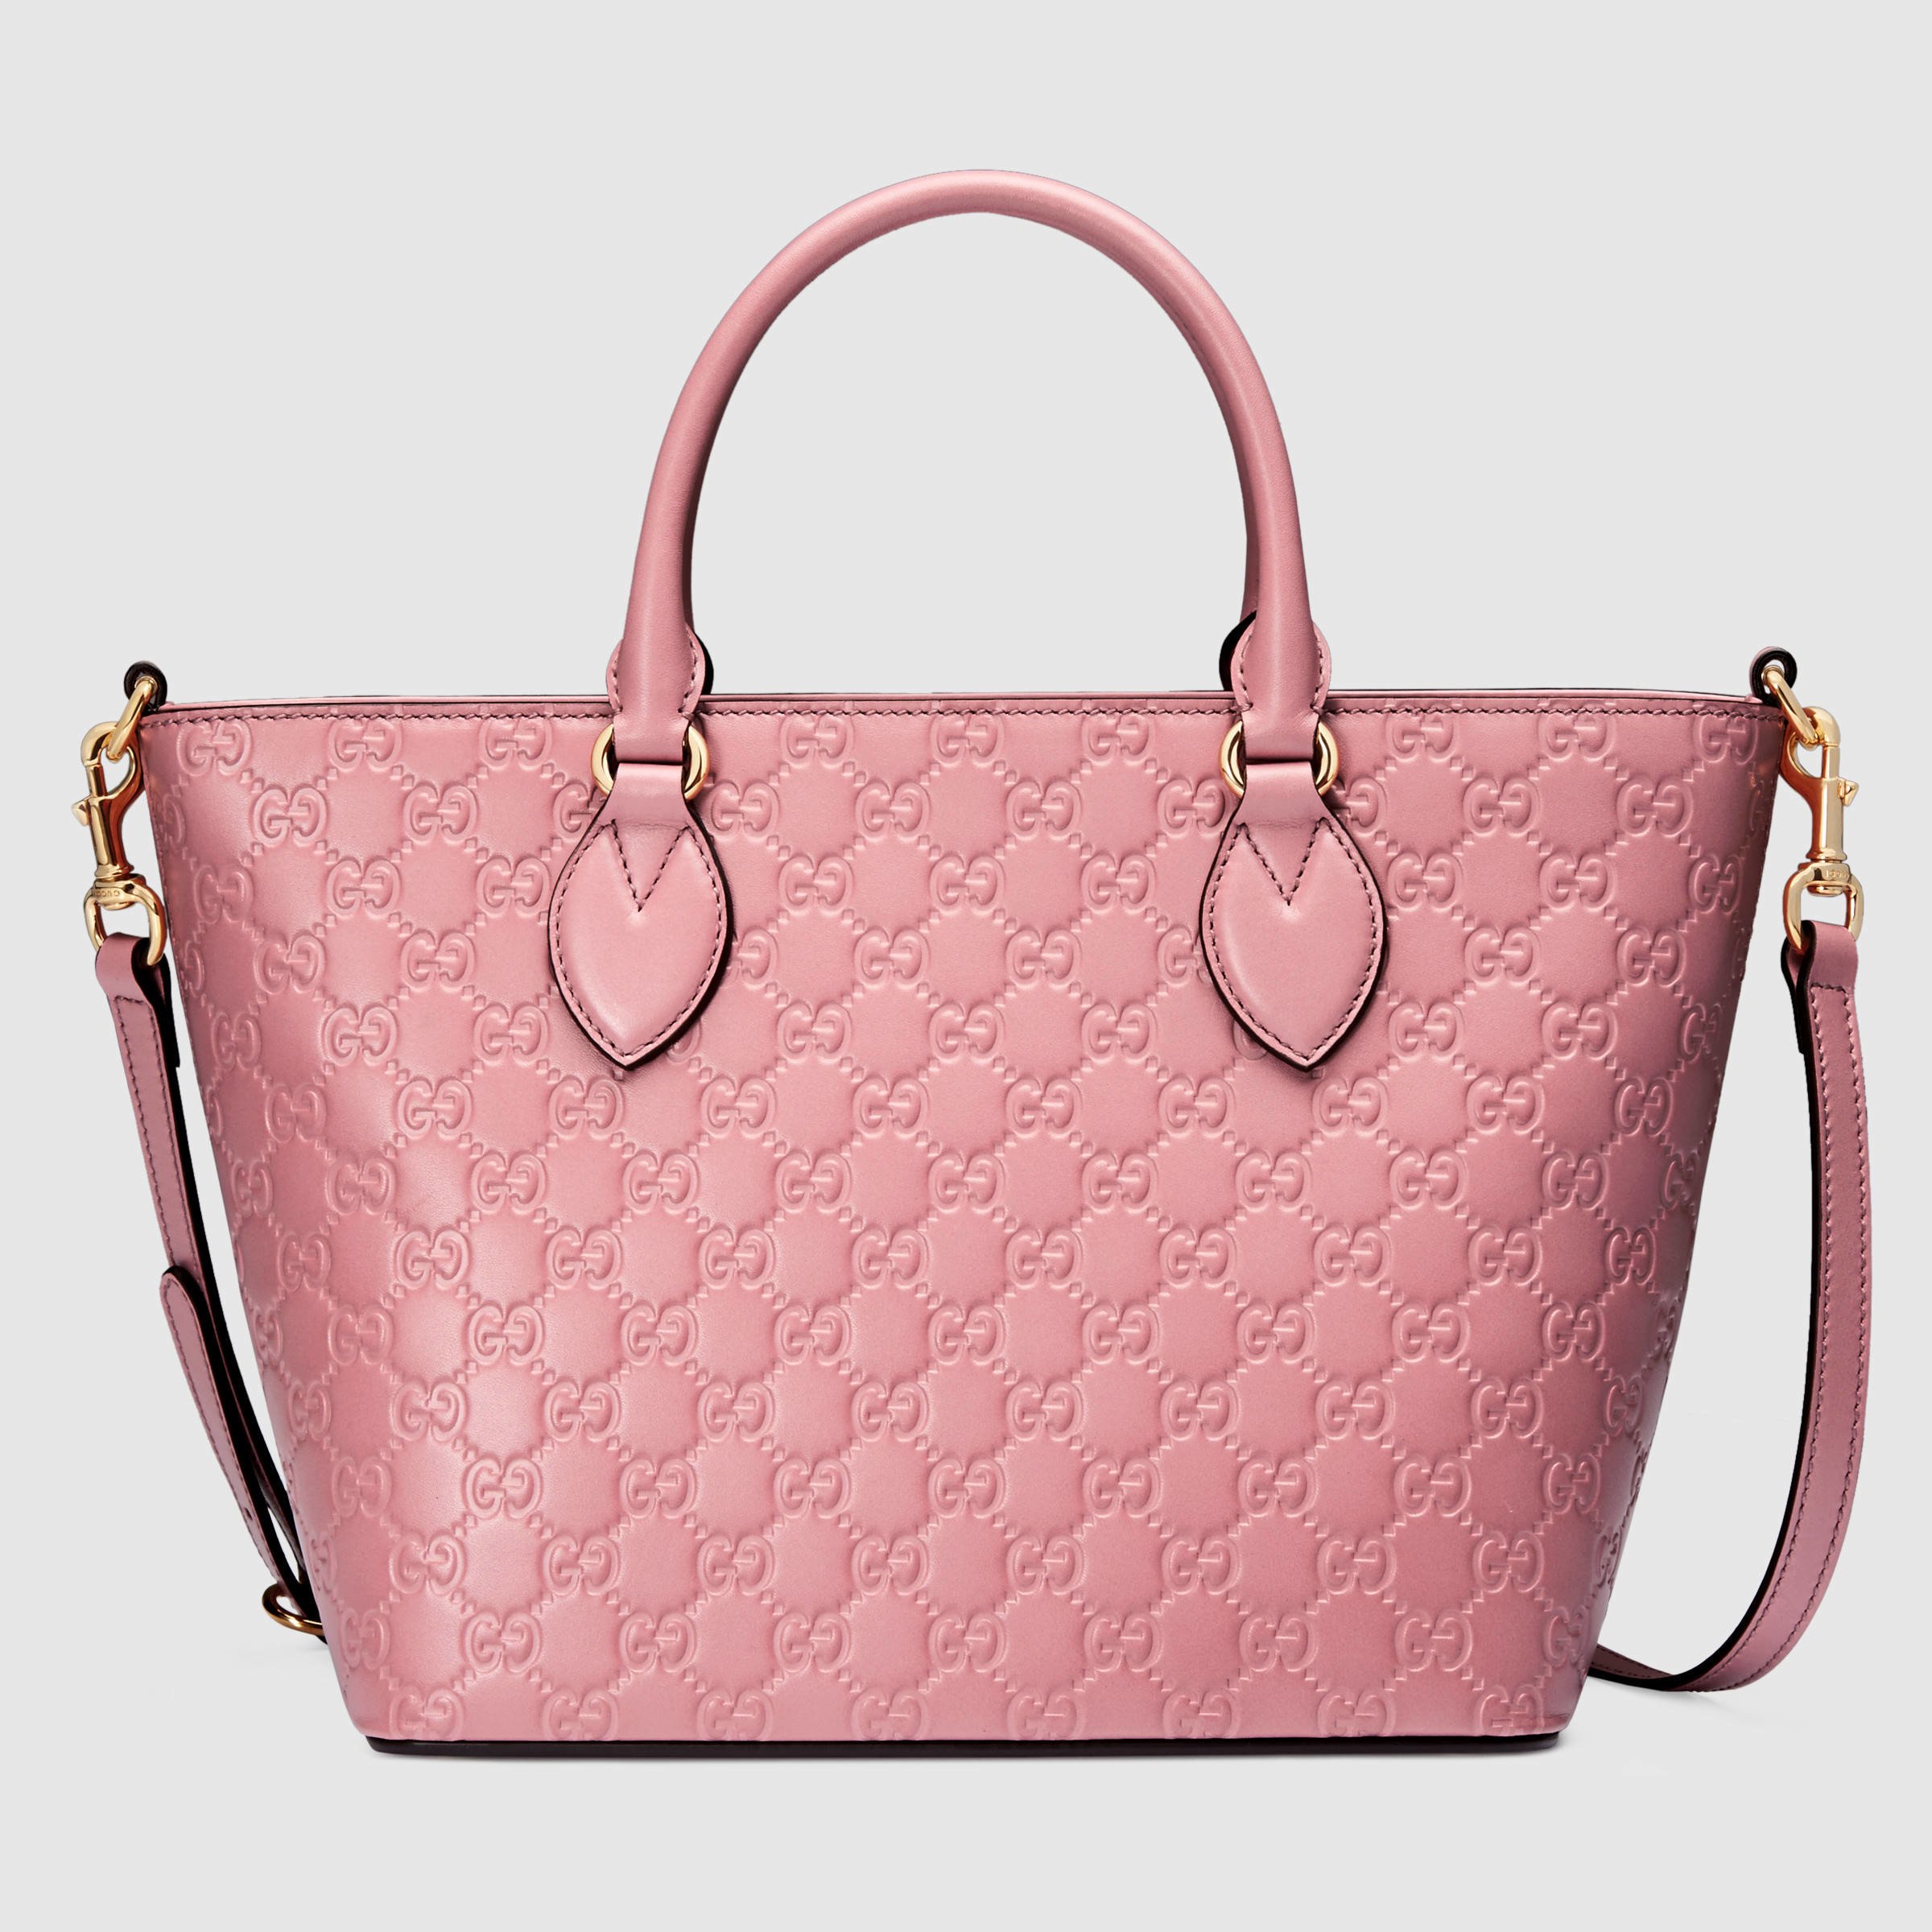 Lyst - Gucci Signature Leather Tote in Pink